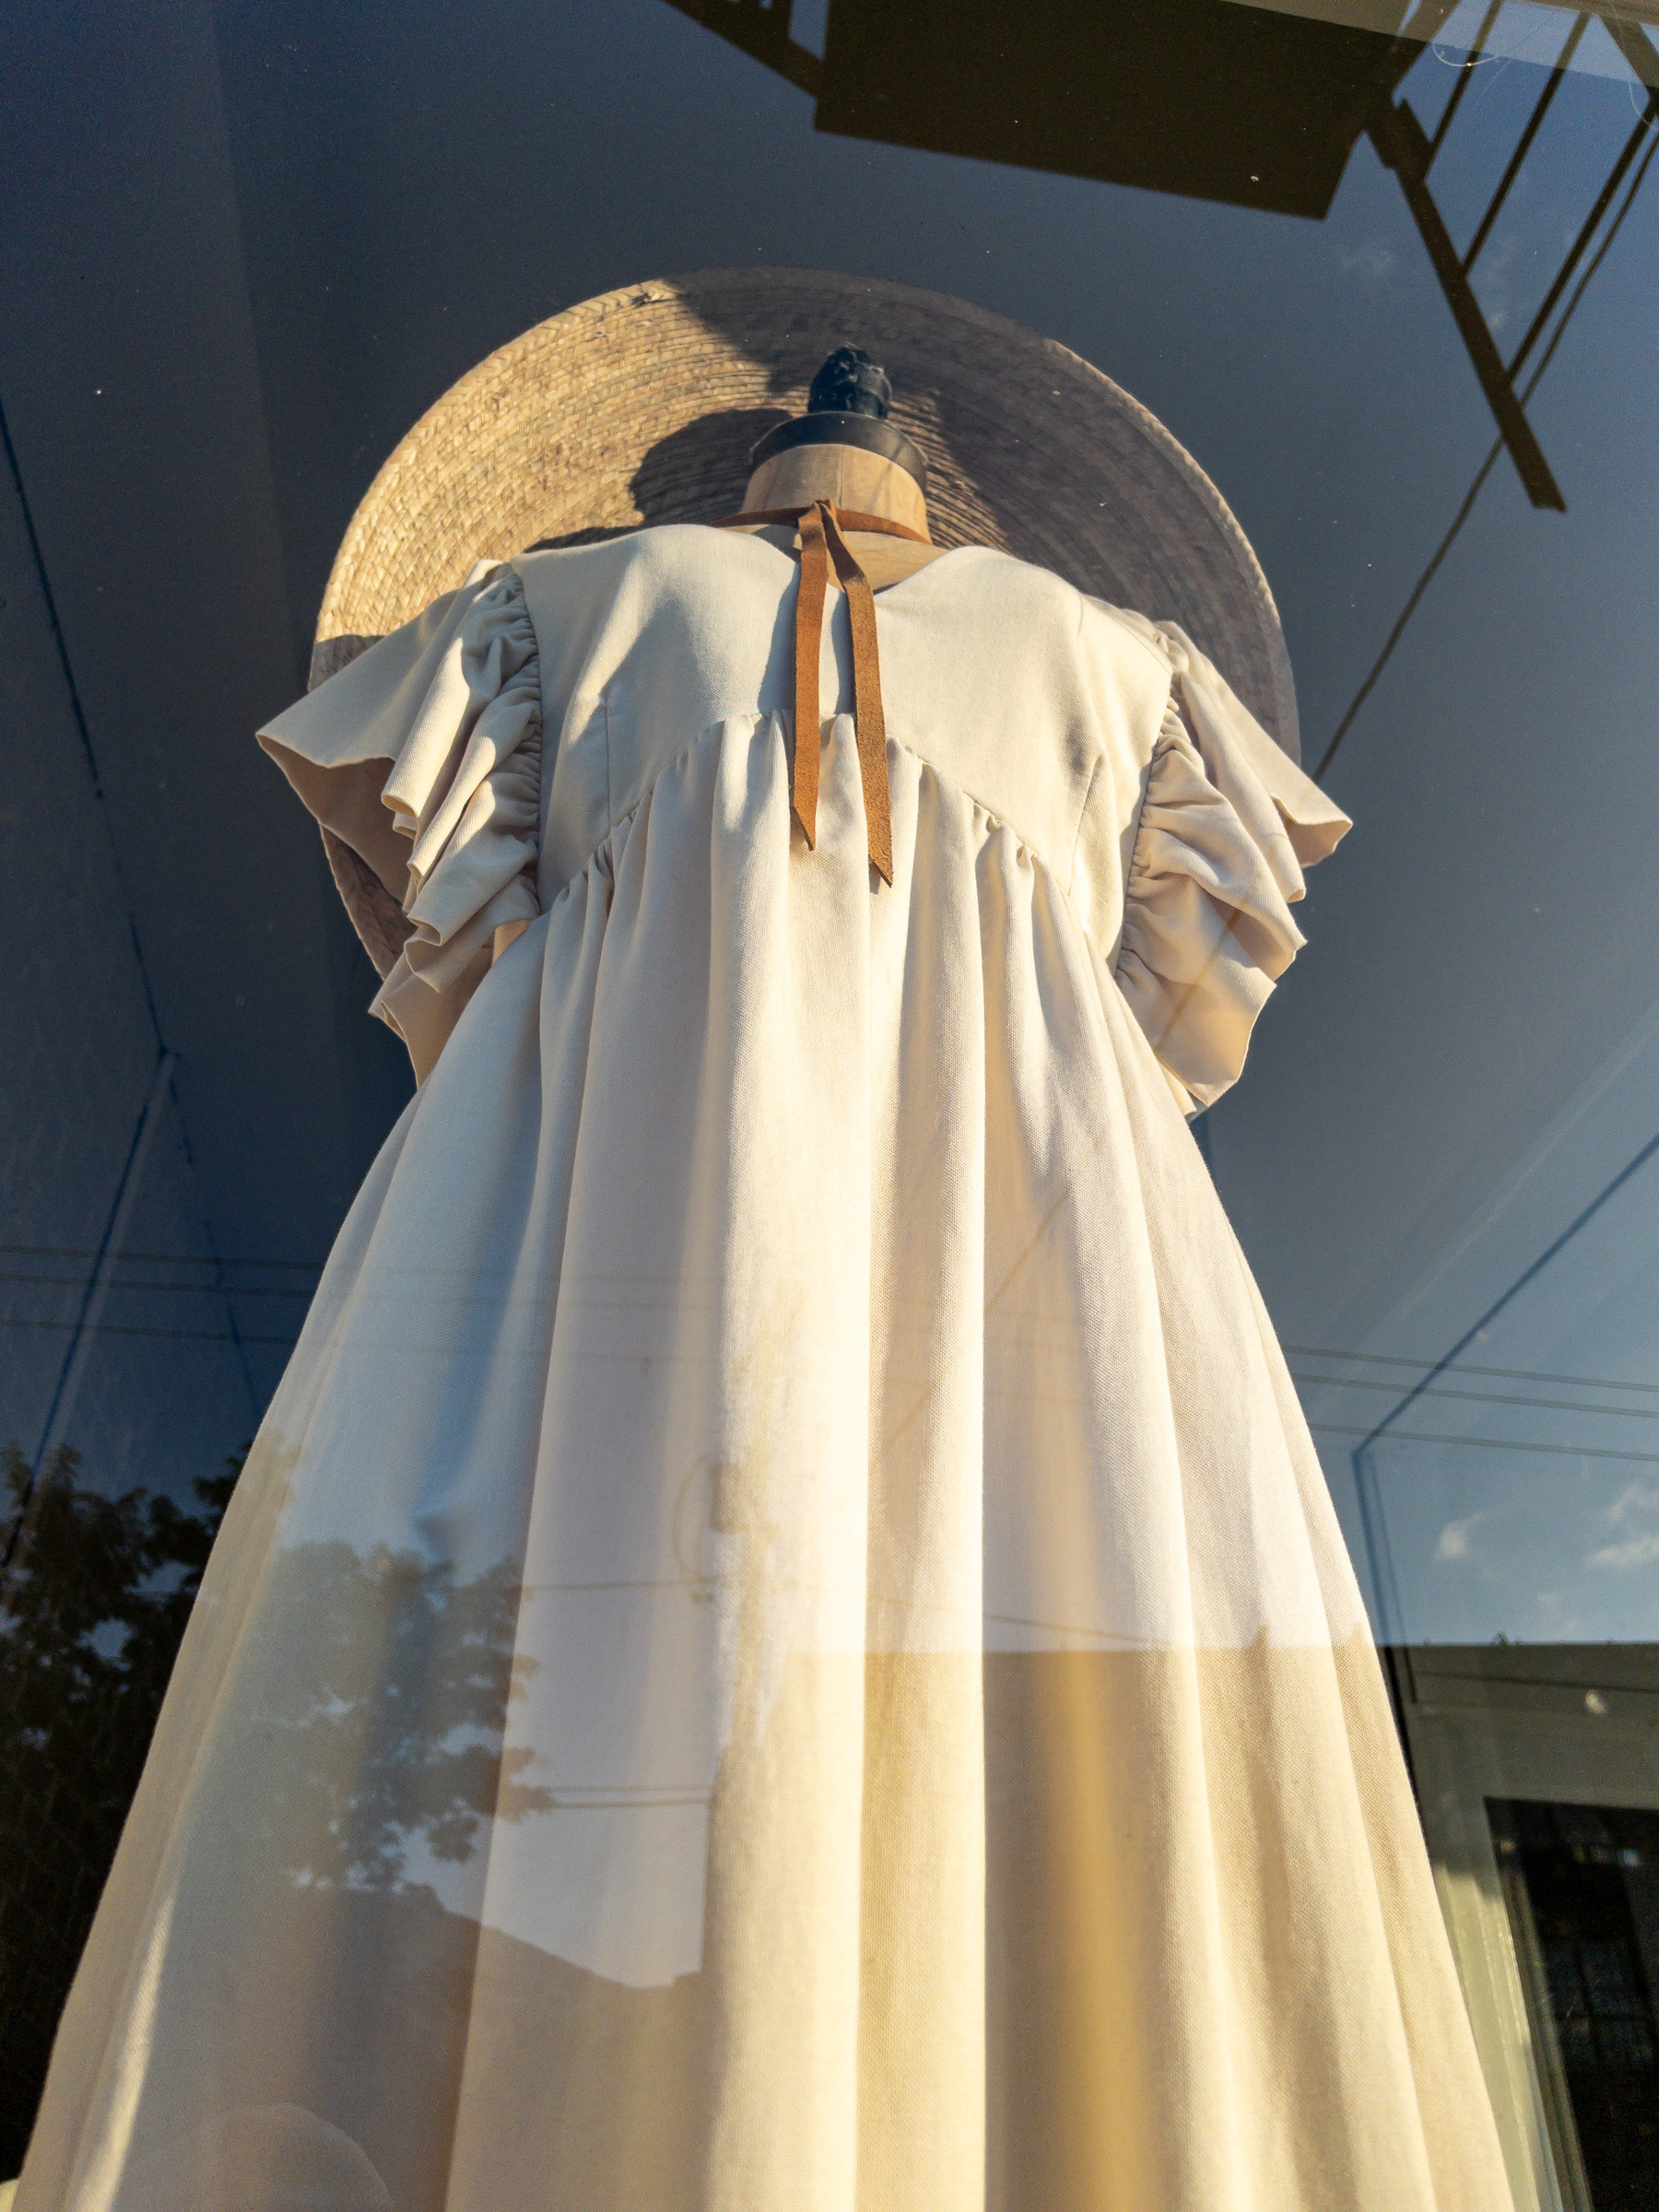 Off-white cotton dress on mannequin gathered under the bust line with pleated short sleeves. Large brim straw hat caps it off. Sky and buildings reflection overlaid.